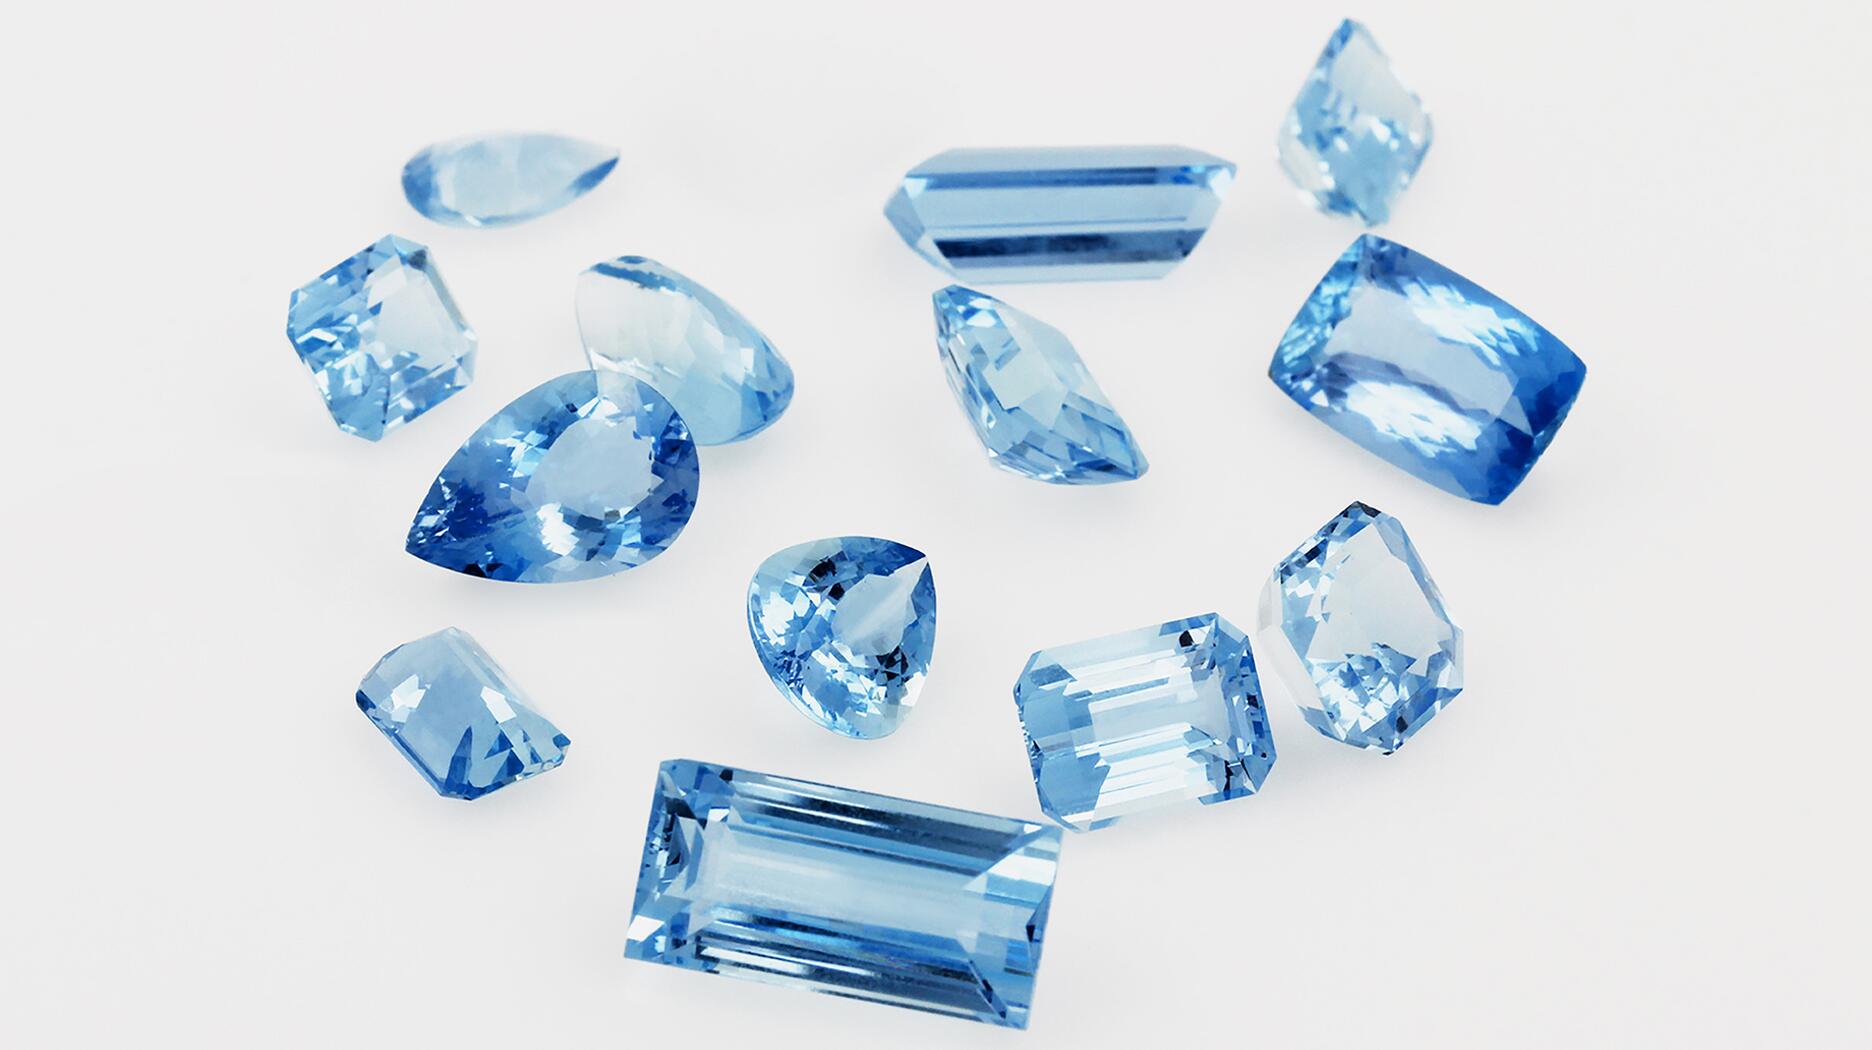 several blue diamonds are scattered on a white surface